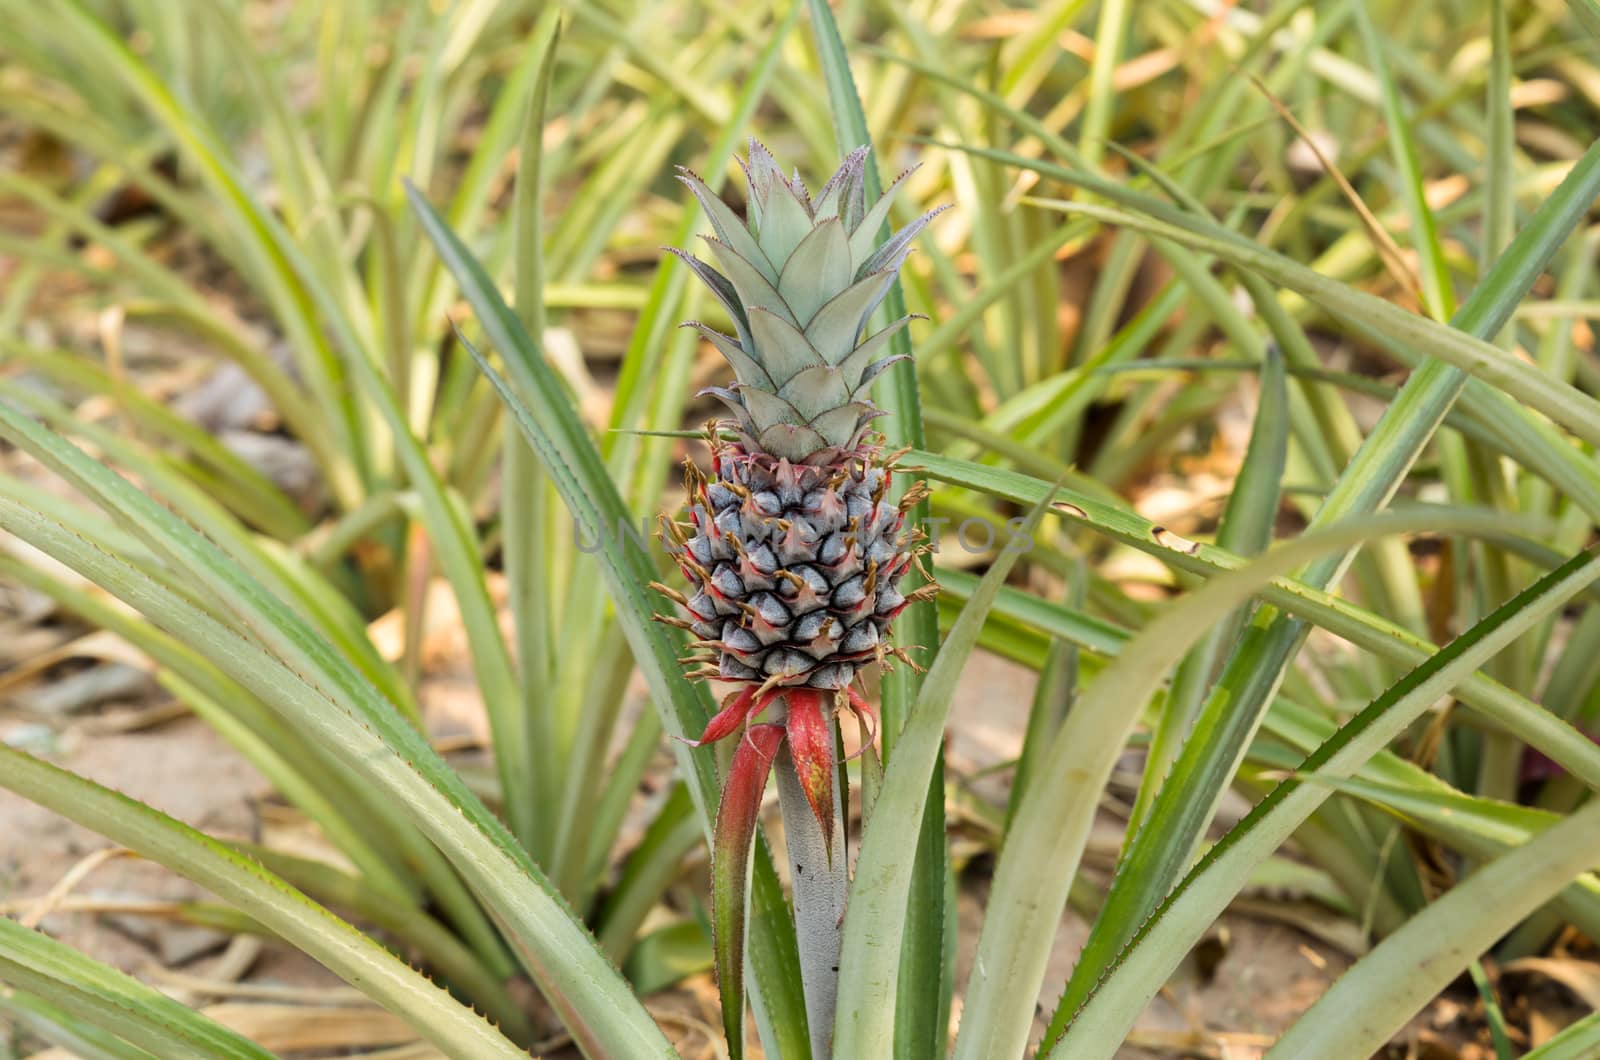 Pineapple tropical fruit growing in a farm